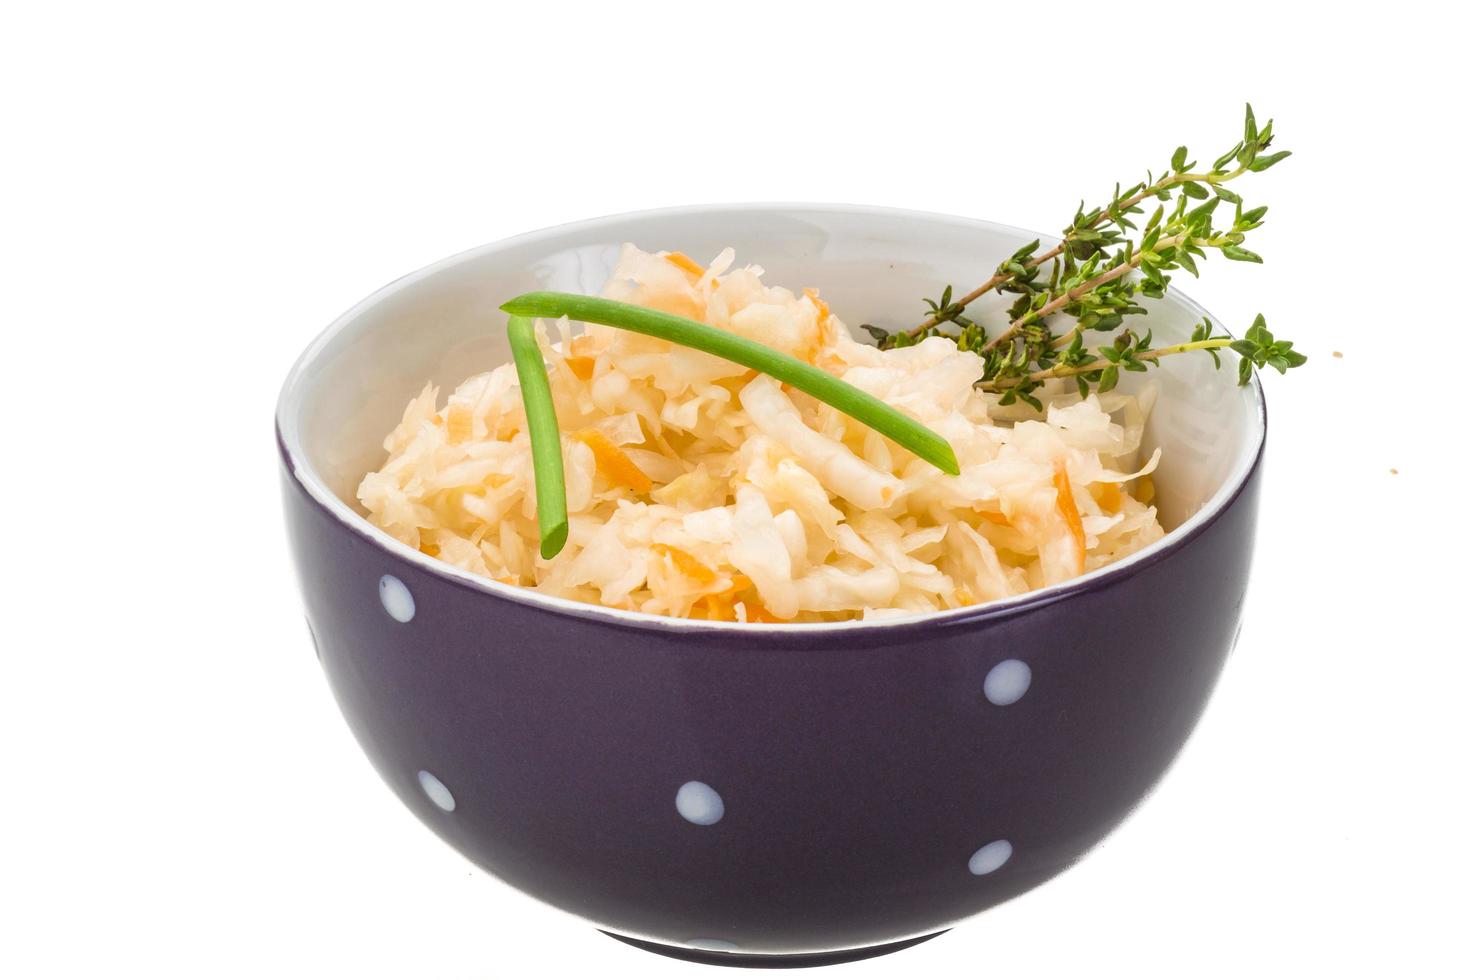 Fermented Cabbage in a bowl on white background photo